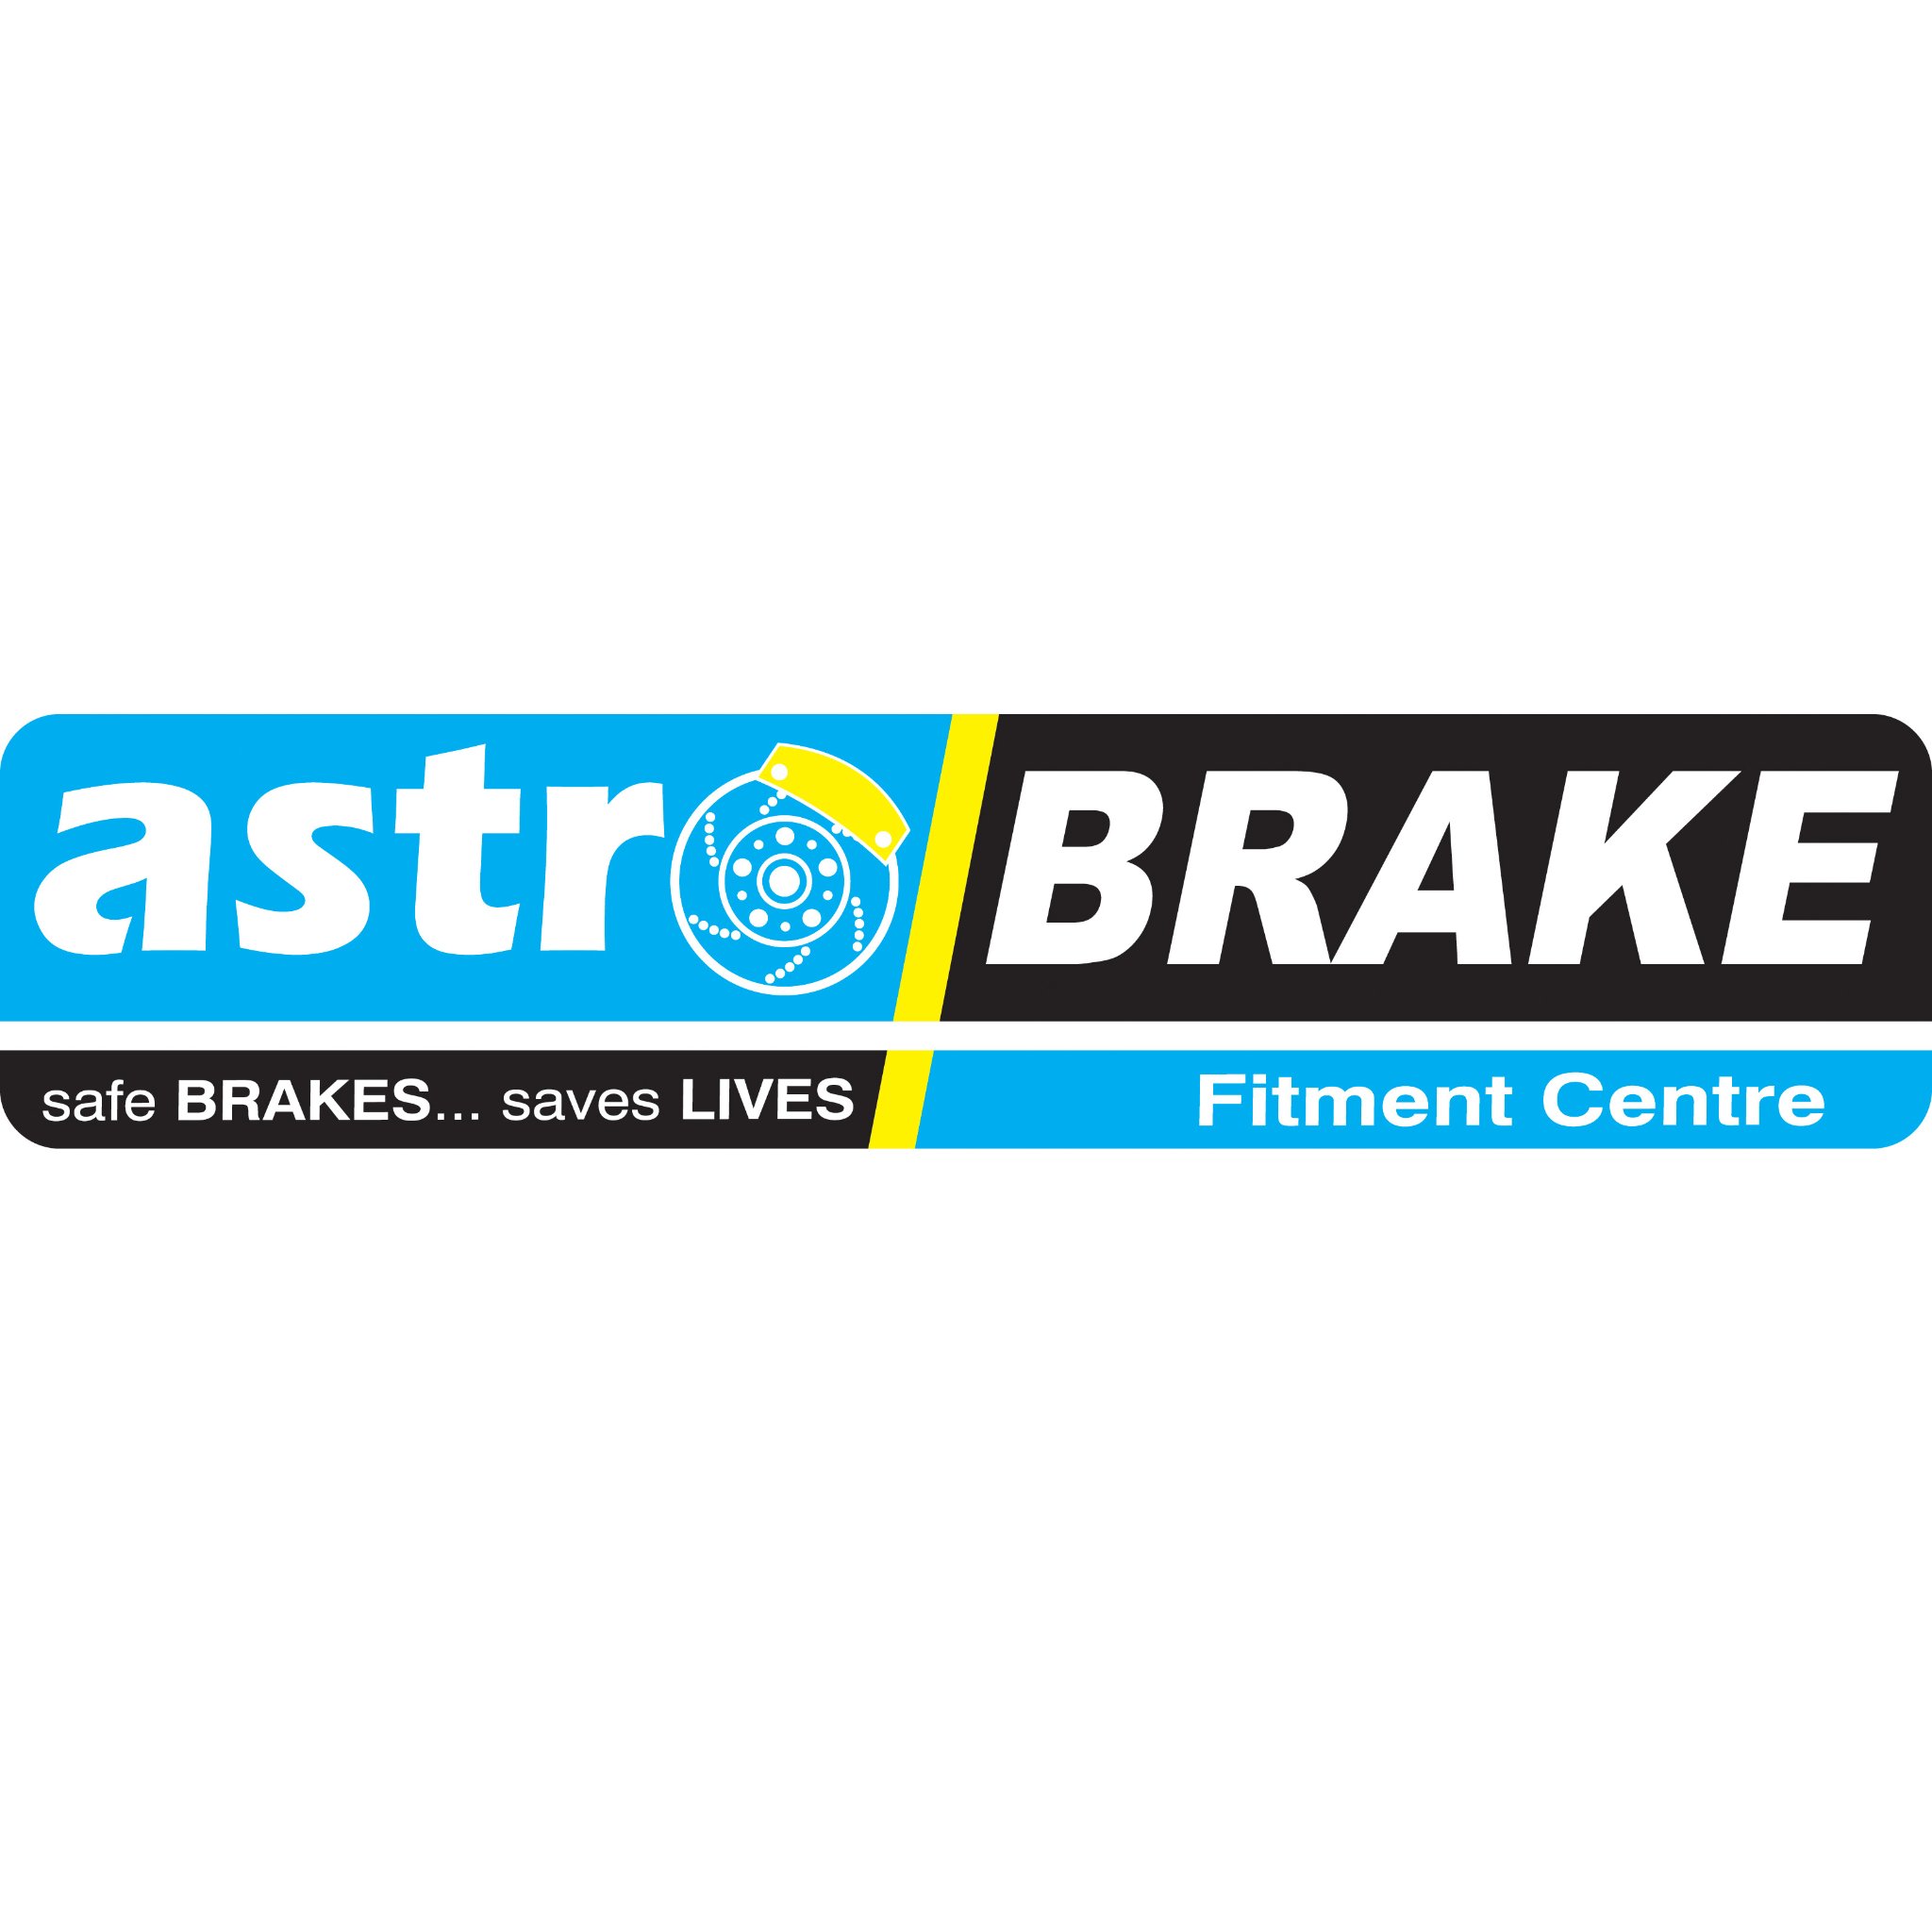 Drive and Arrive Safely! Brake and Clutch Safety is our main priority. #AstroBrake #brakes #clutch